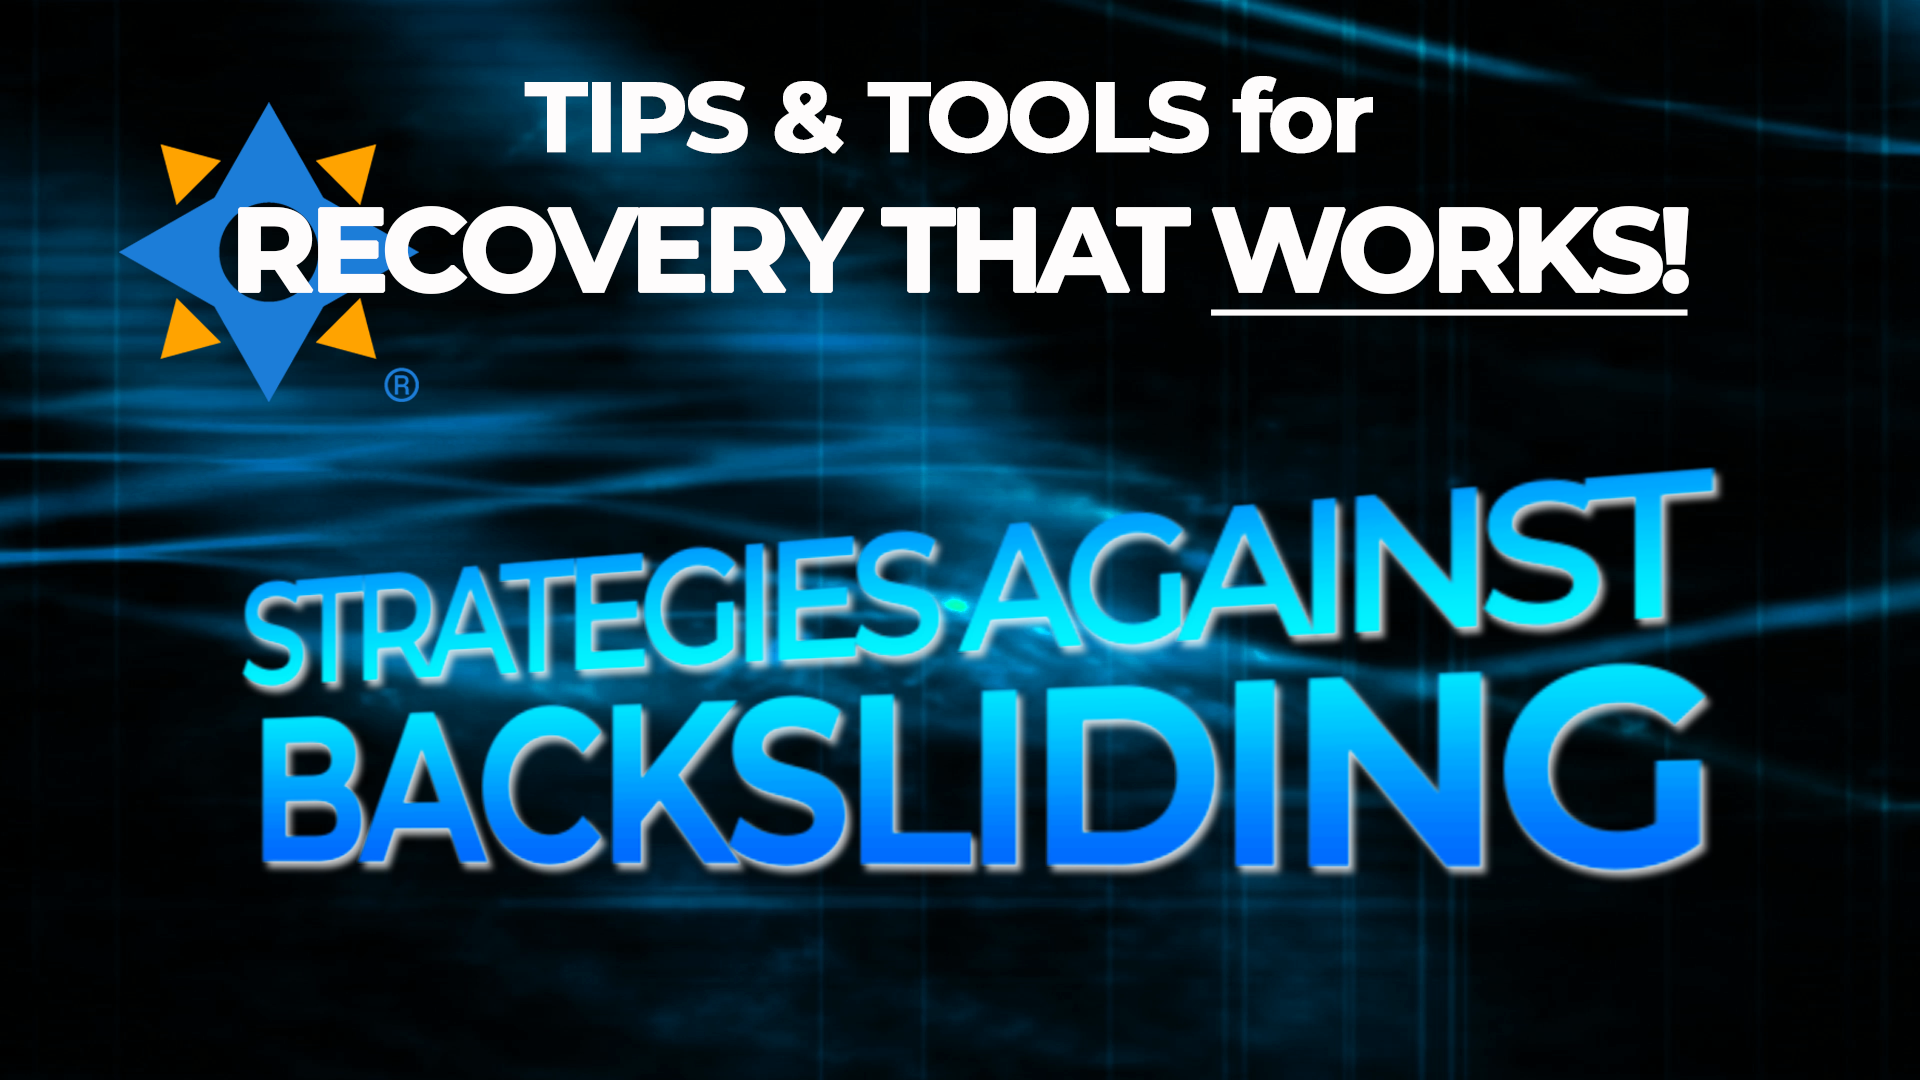 [Video] Strategies Against Backsliding – Tips & Tools for Recovery That Works!